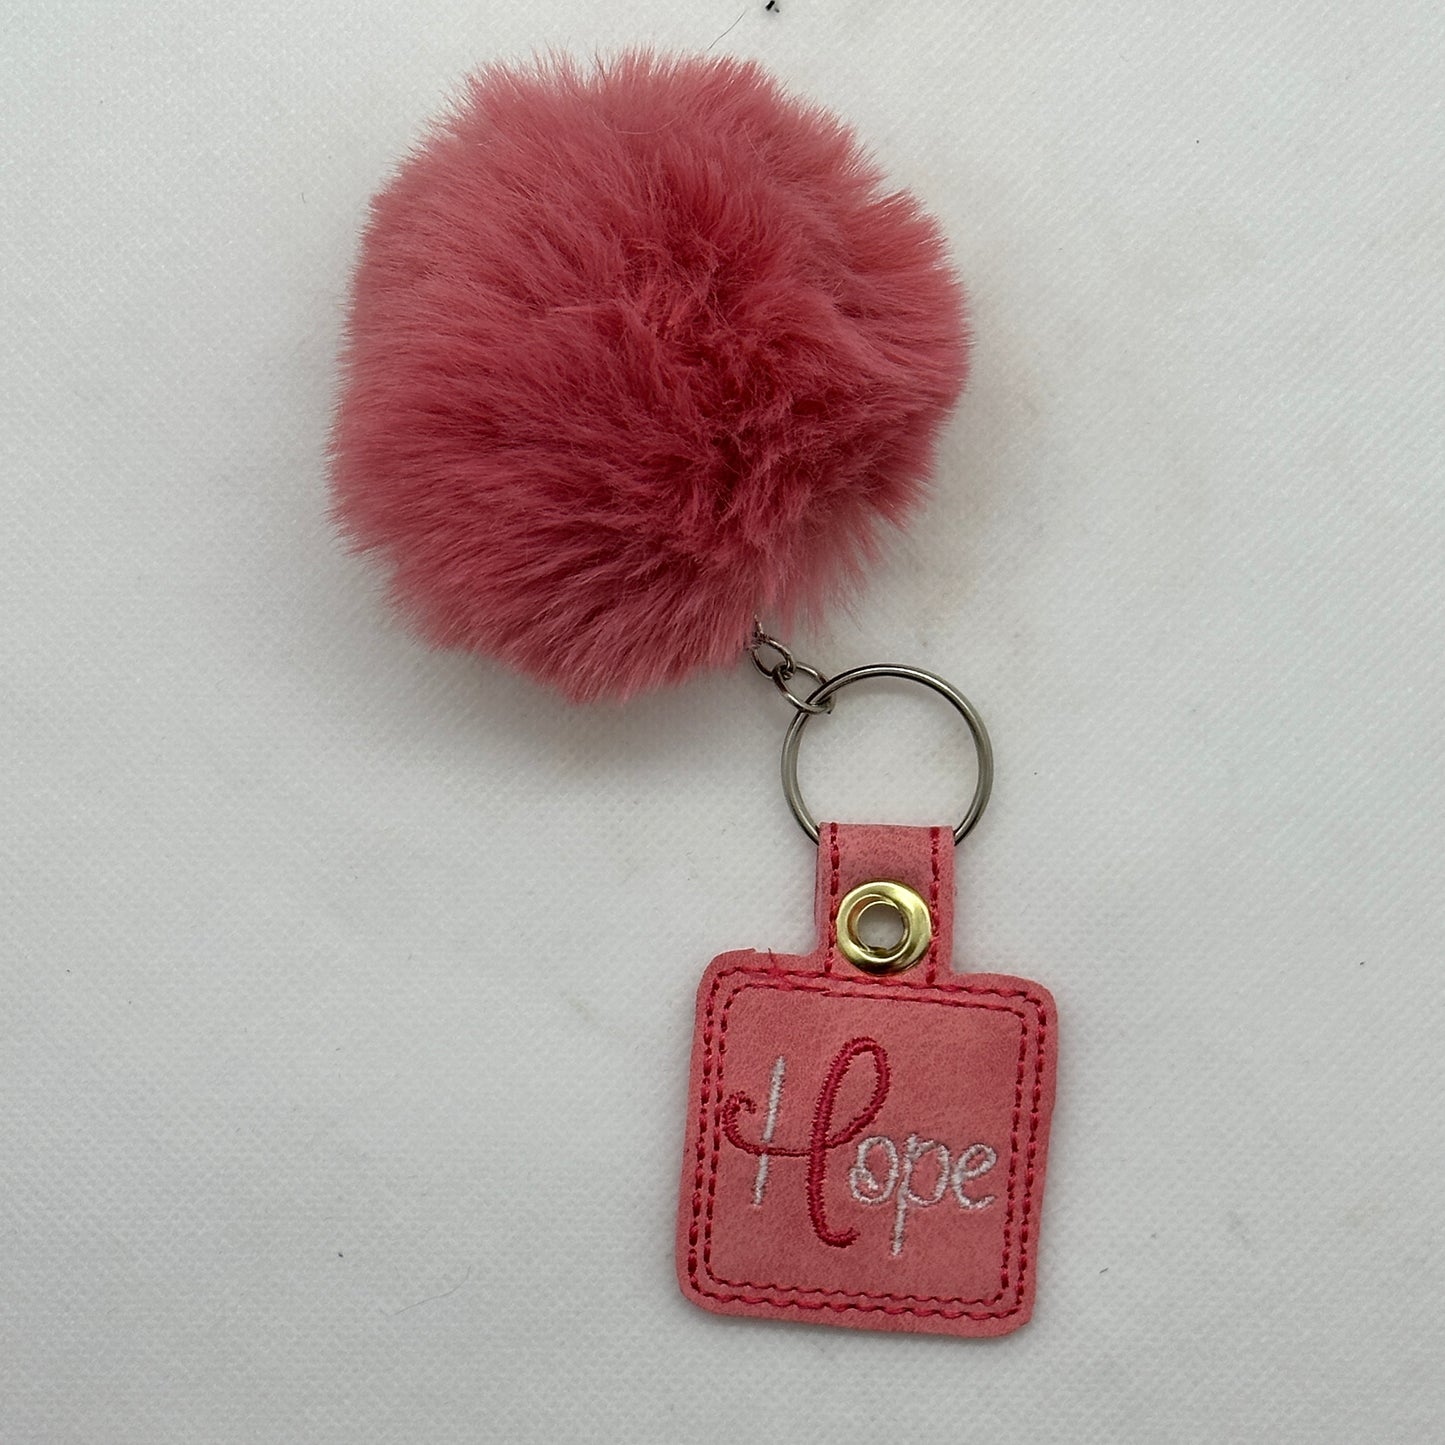 Breast cancer awareness key chain